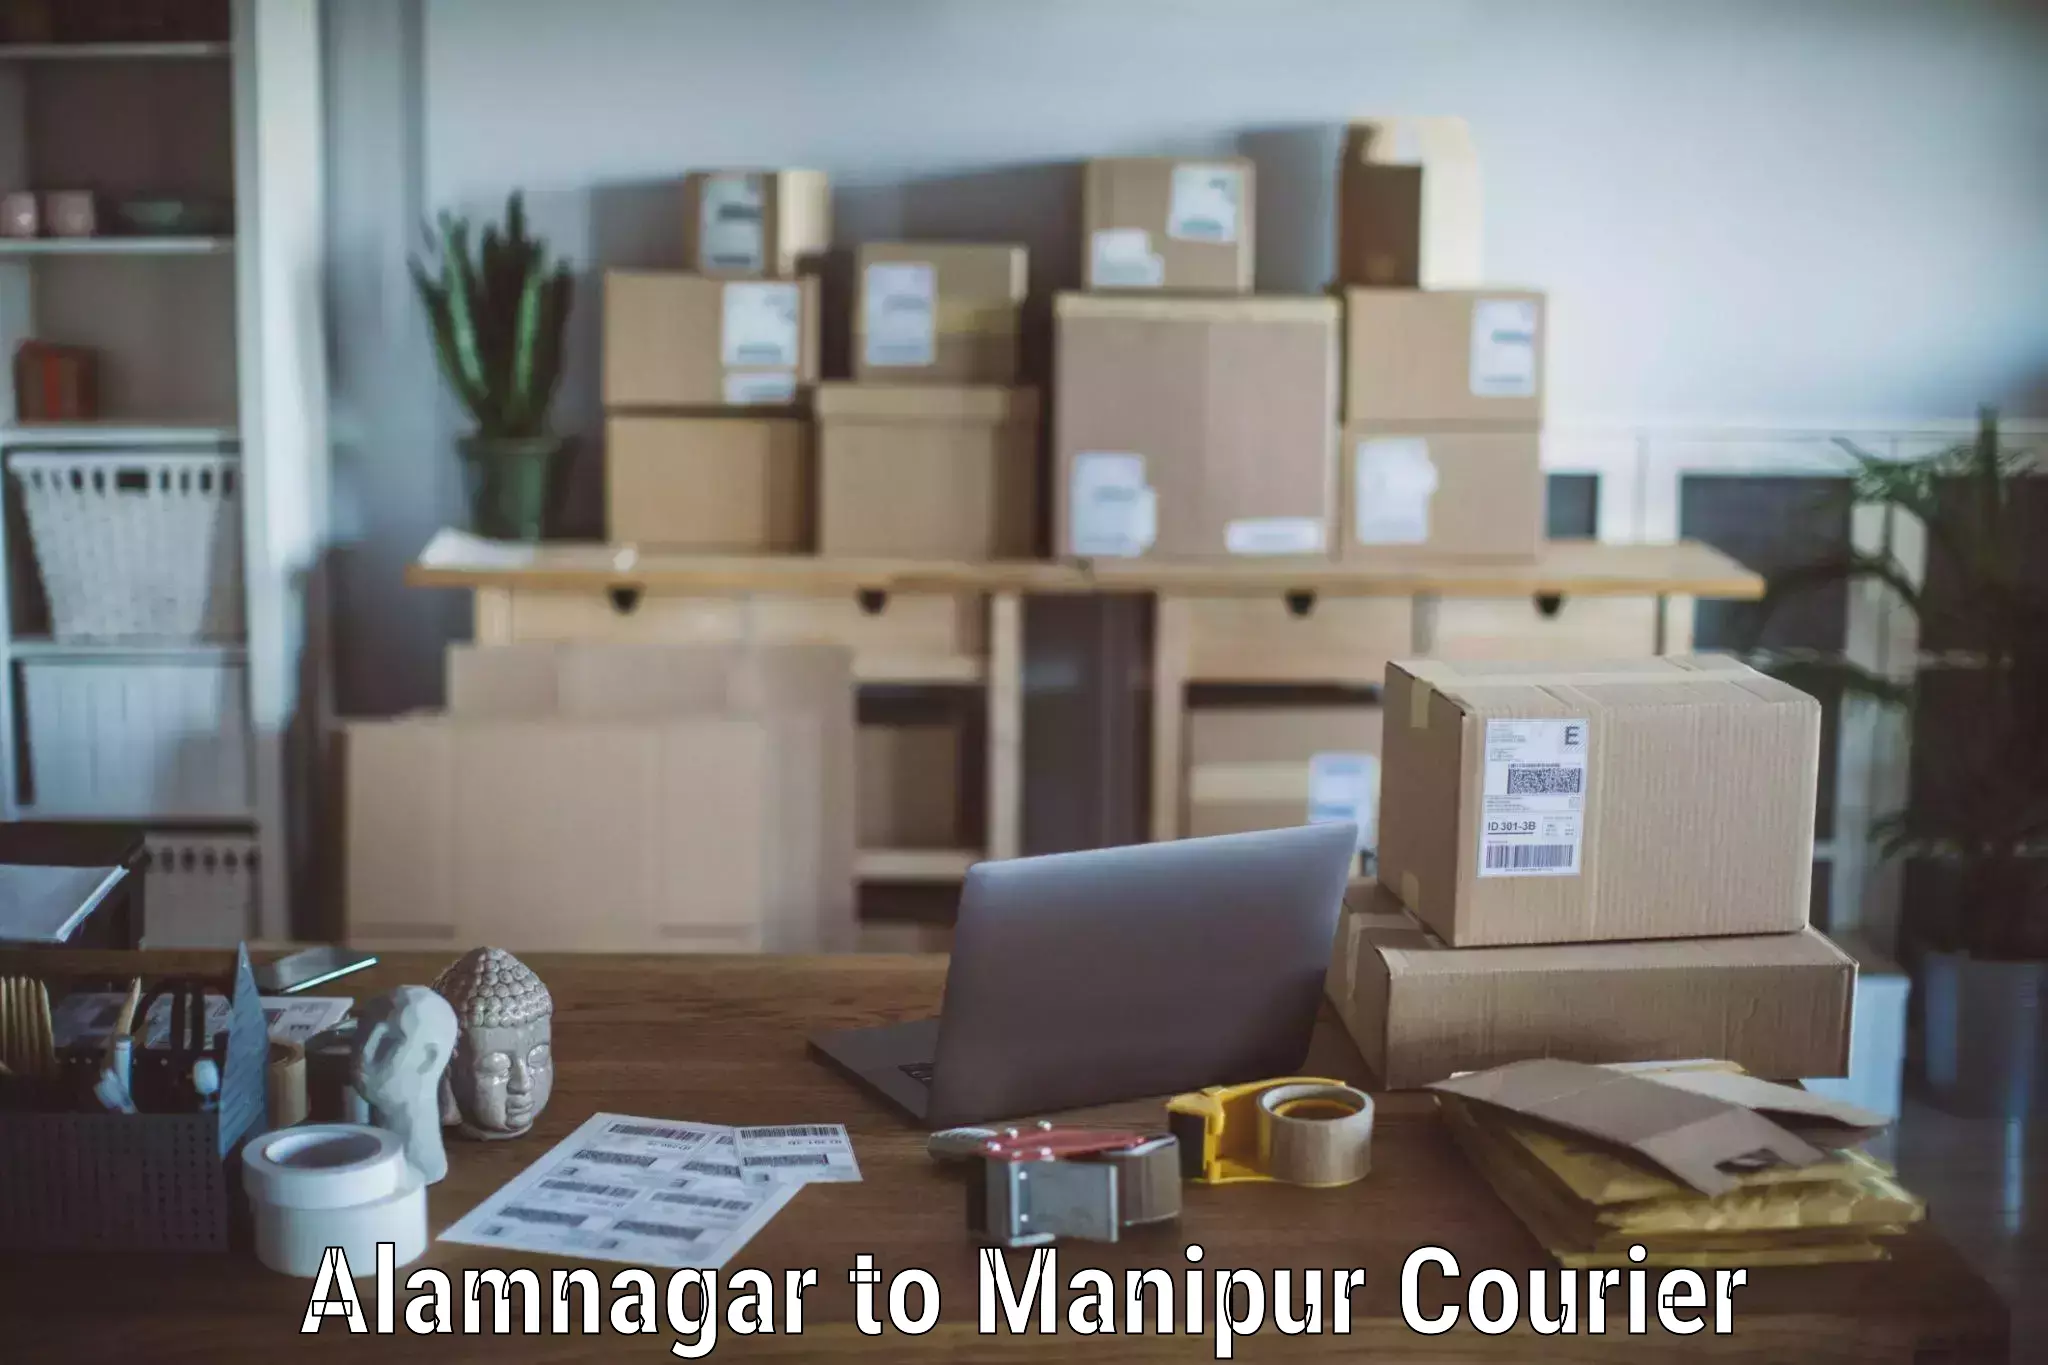 Trusted relocation experts Alamnagar to Manipur